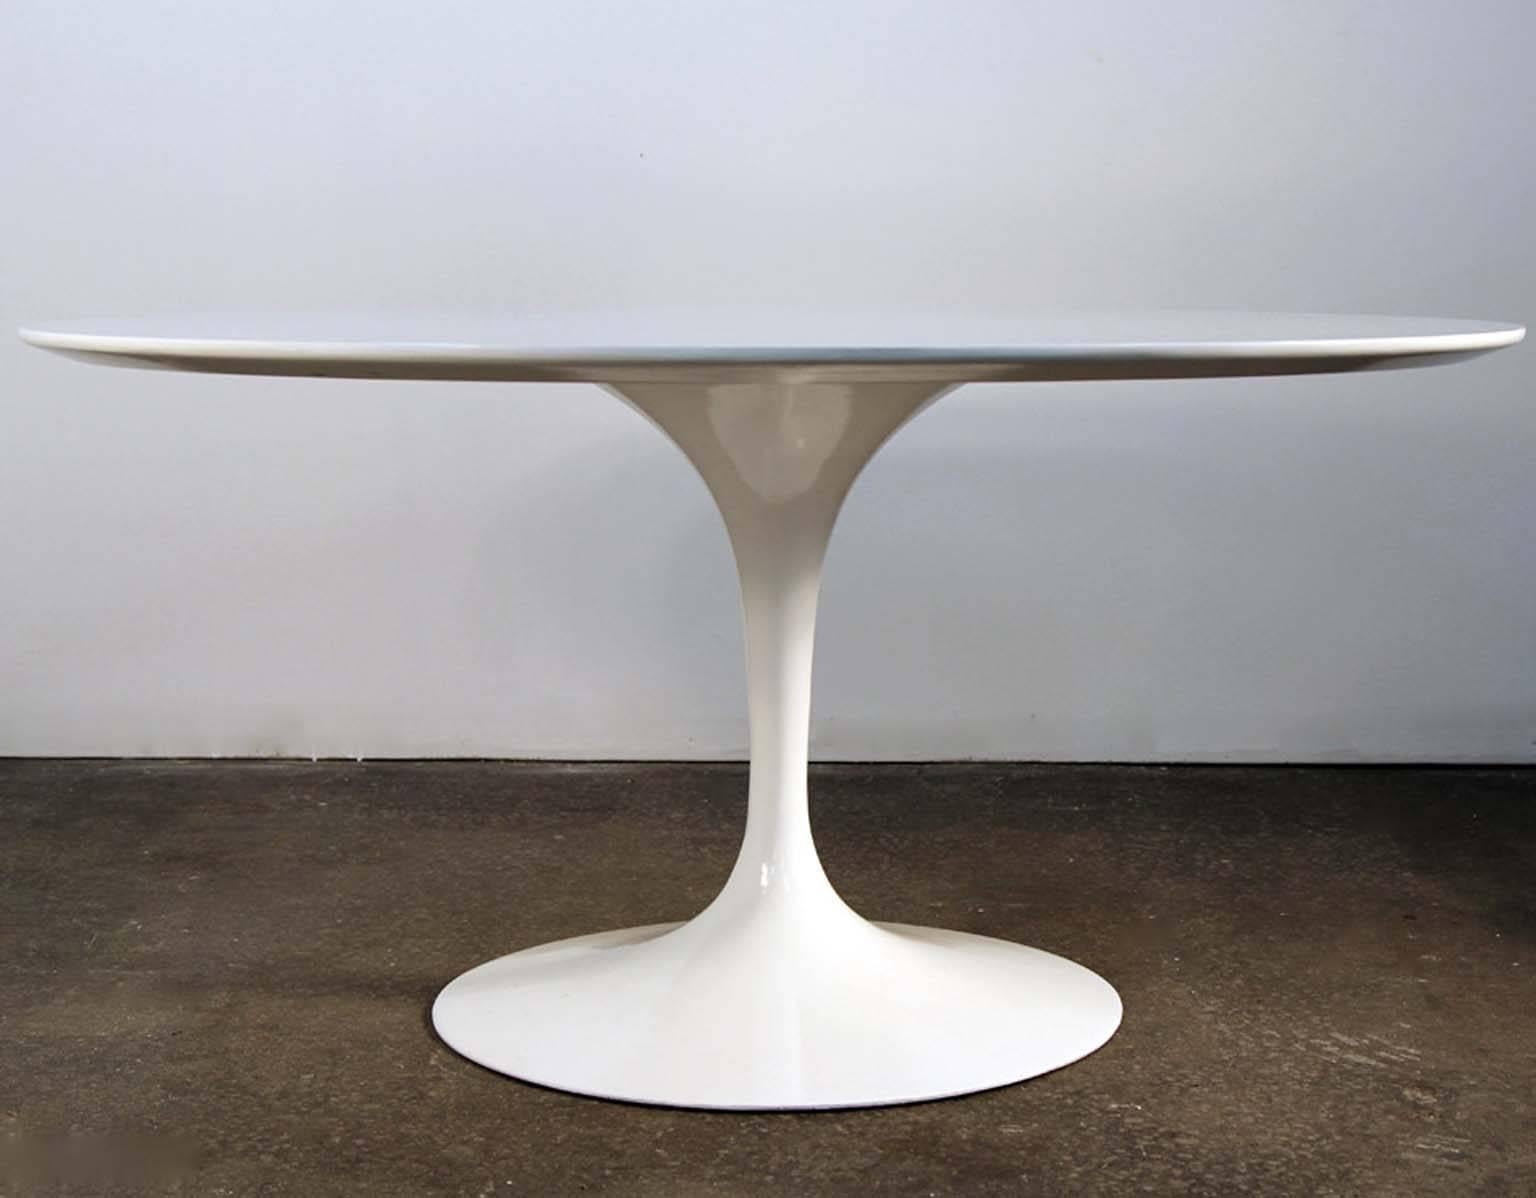 Incredible restored original Saarinen tulip table newly white lacquered. Original laminate top has been restored and lacquered in semi-gloss white, to bring new life to this original table. Knife edge top on metal base. Base powder coated and newly